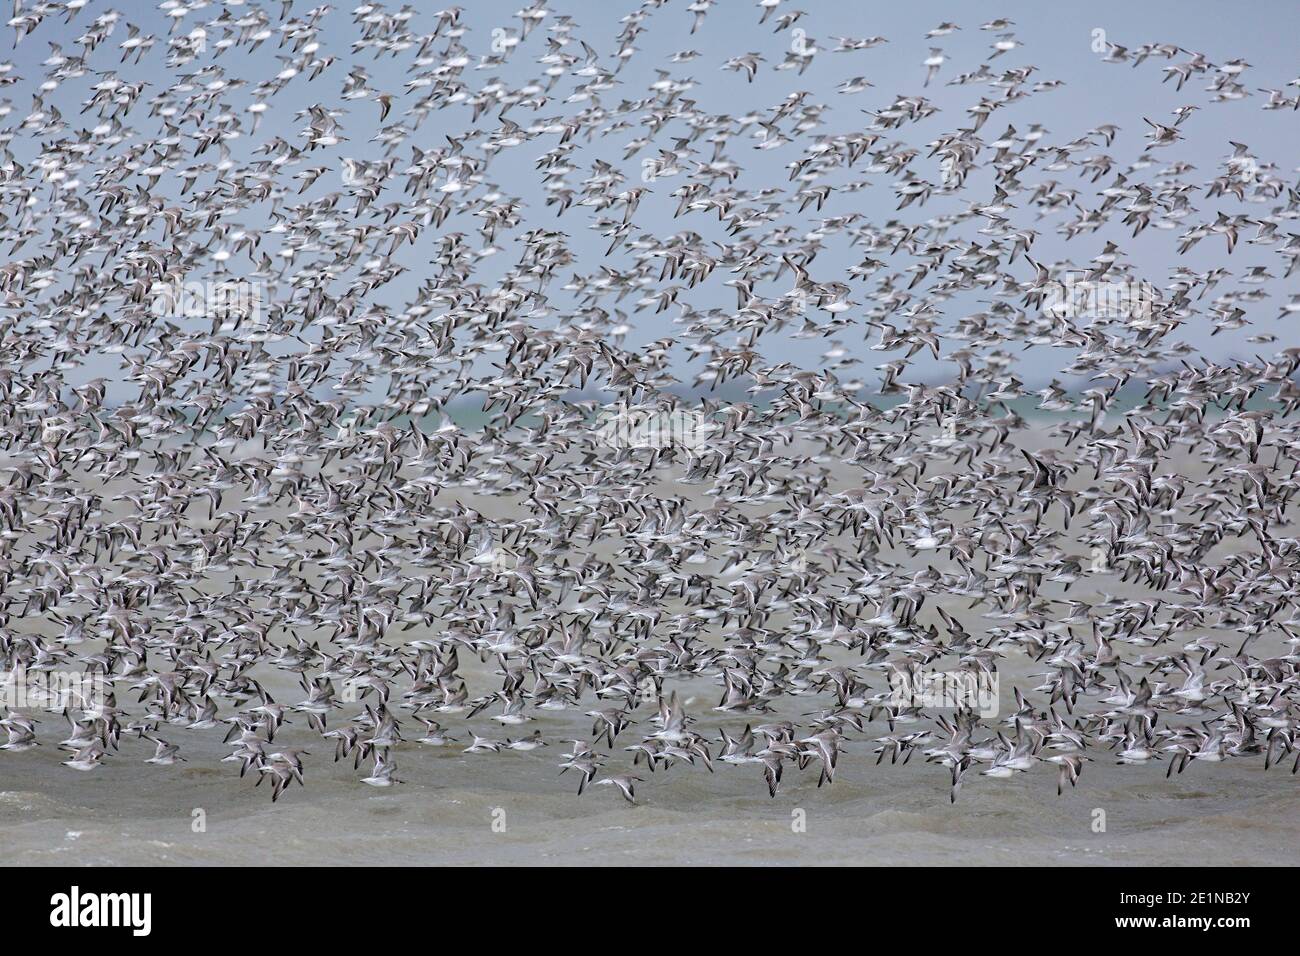 Red knots (Calidris canutus / Tringa canutus ) huge red knot flock in flight in non-breeding plumage flying over sea in winter along the coast Stock Photo